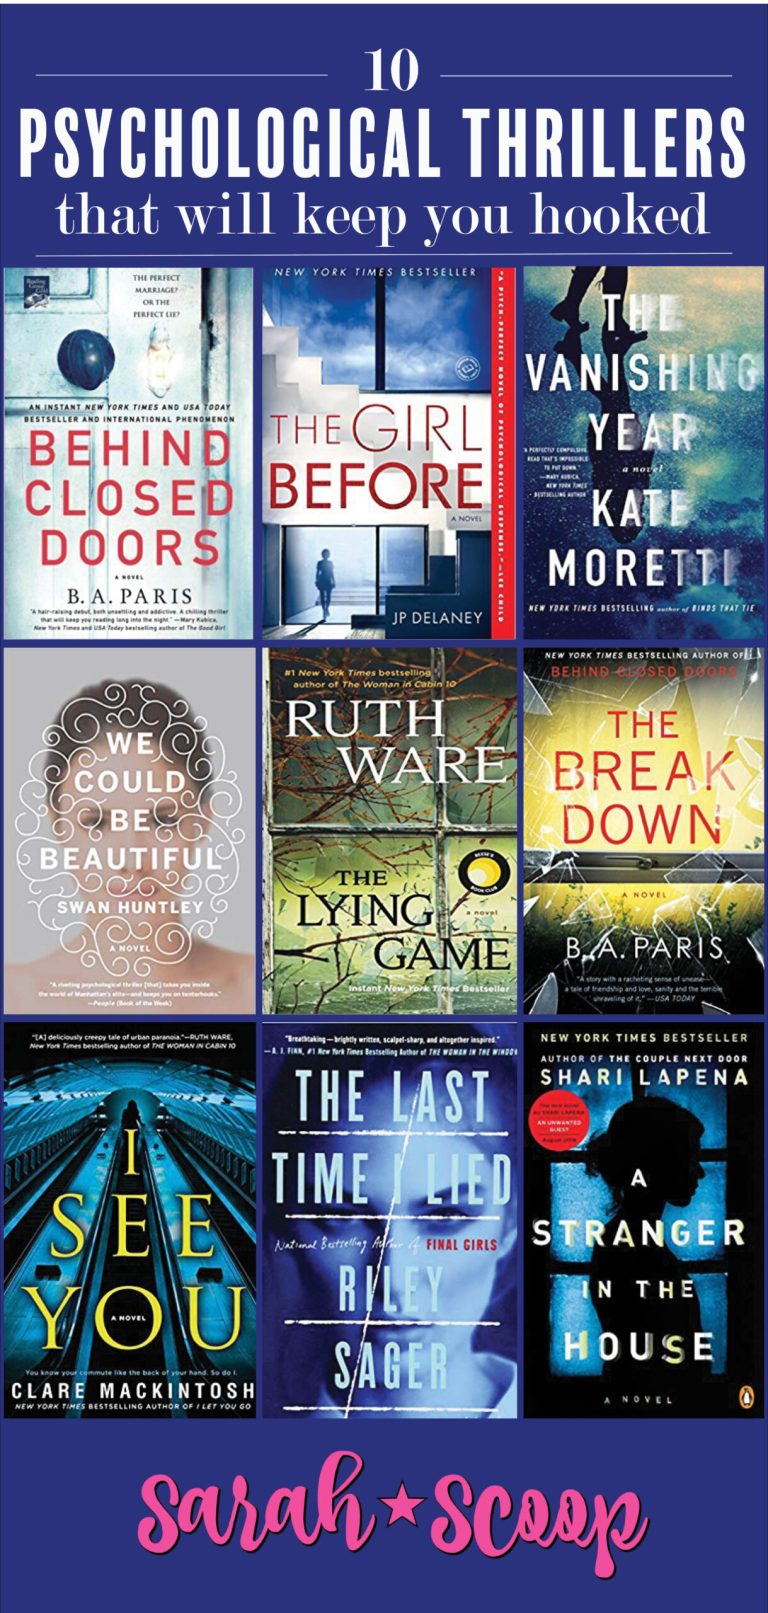 10 Psychological Thriller Novels to Add to Your Reading List